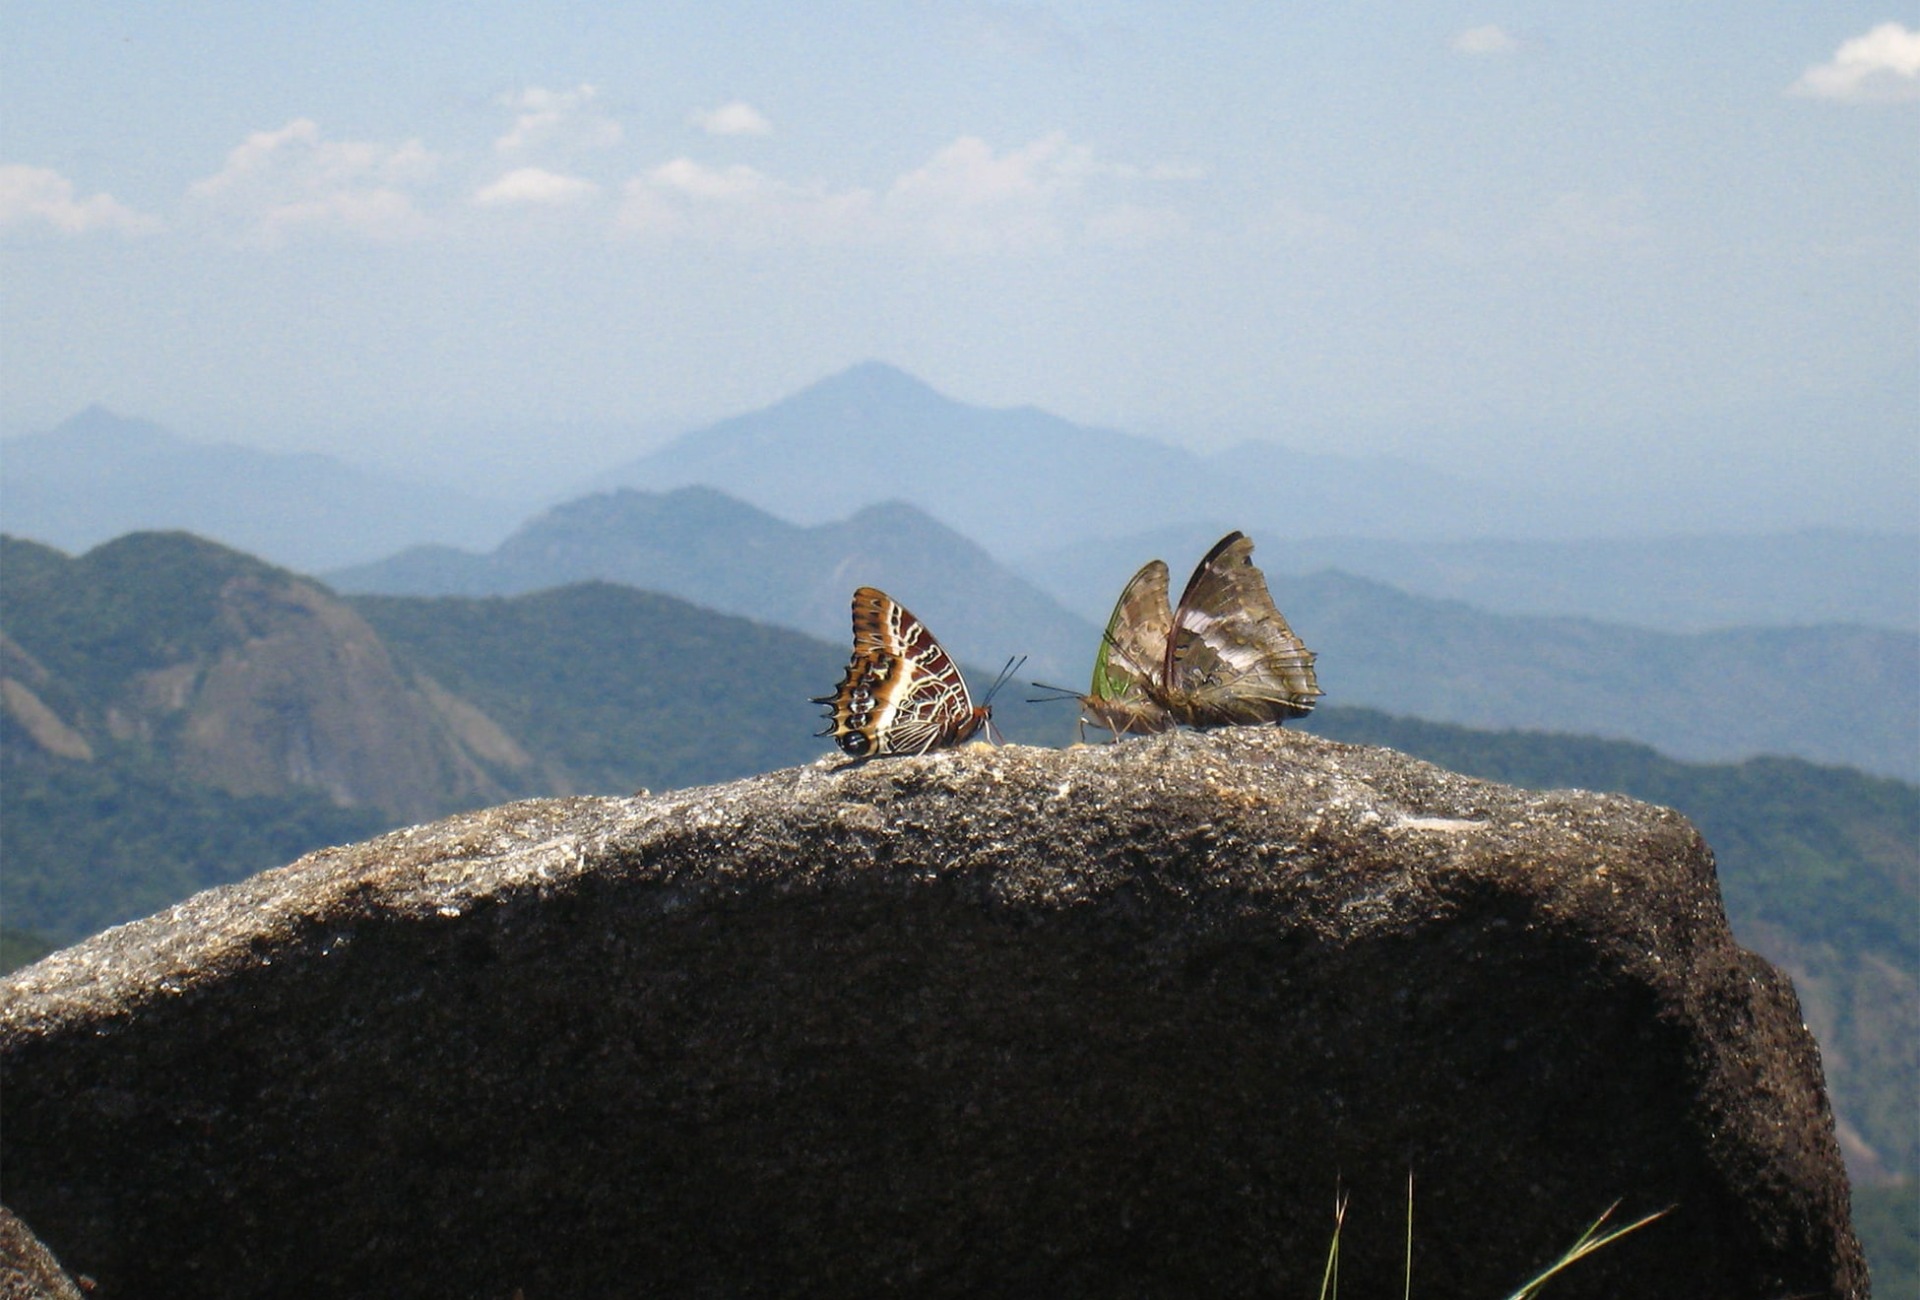 Butterflies rest on the summit of Mount Mabu in Mozambique, by Julian Bayliss